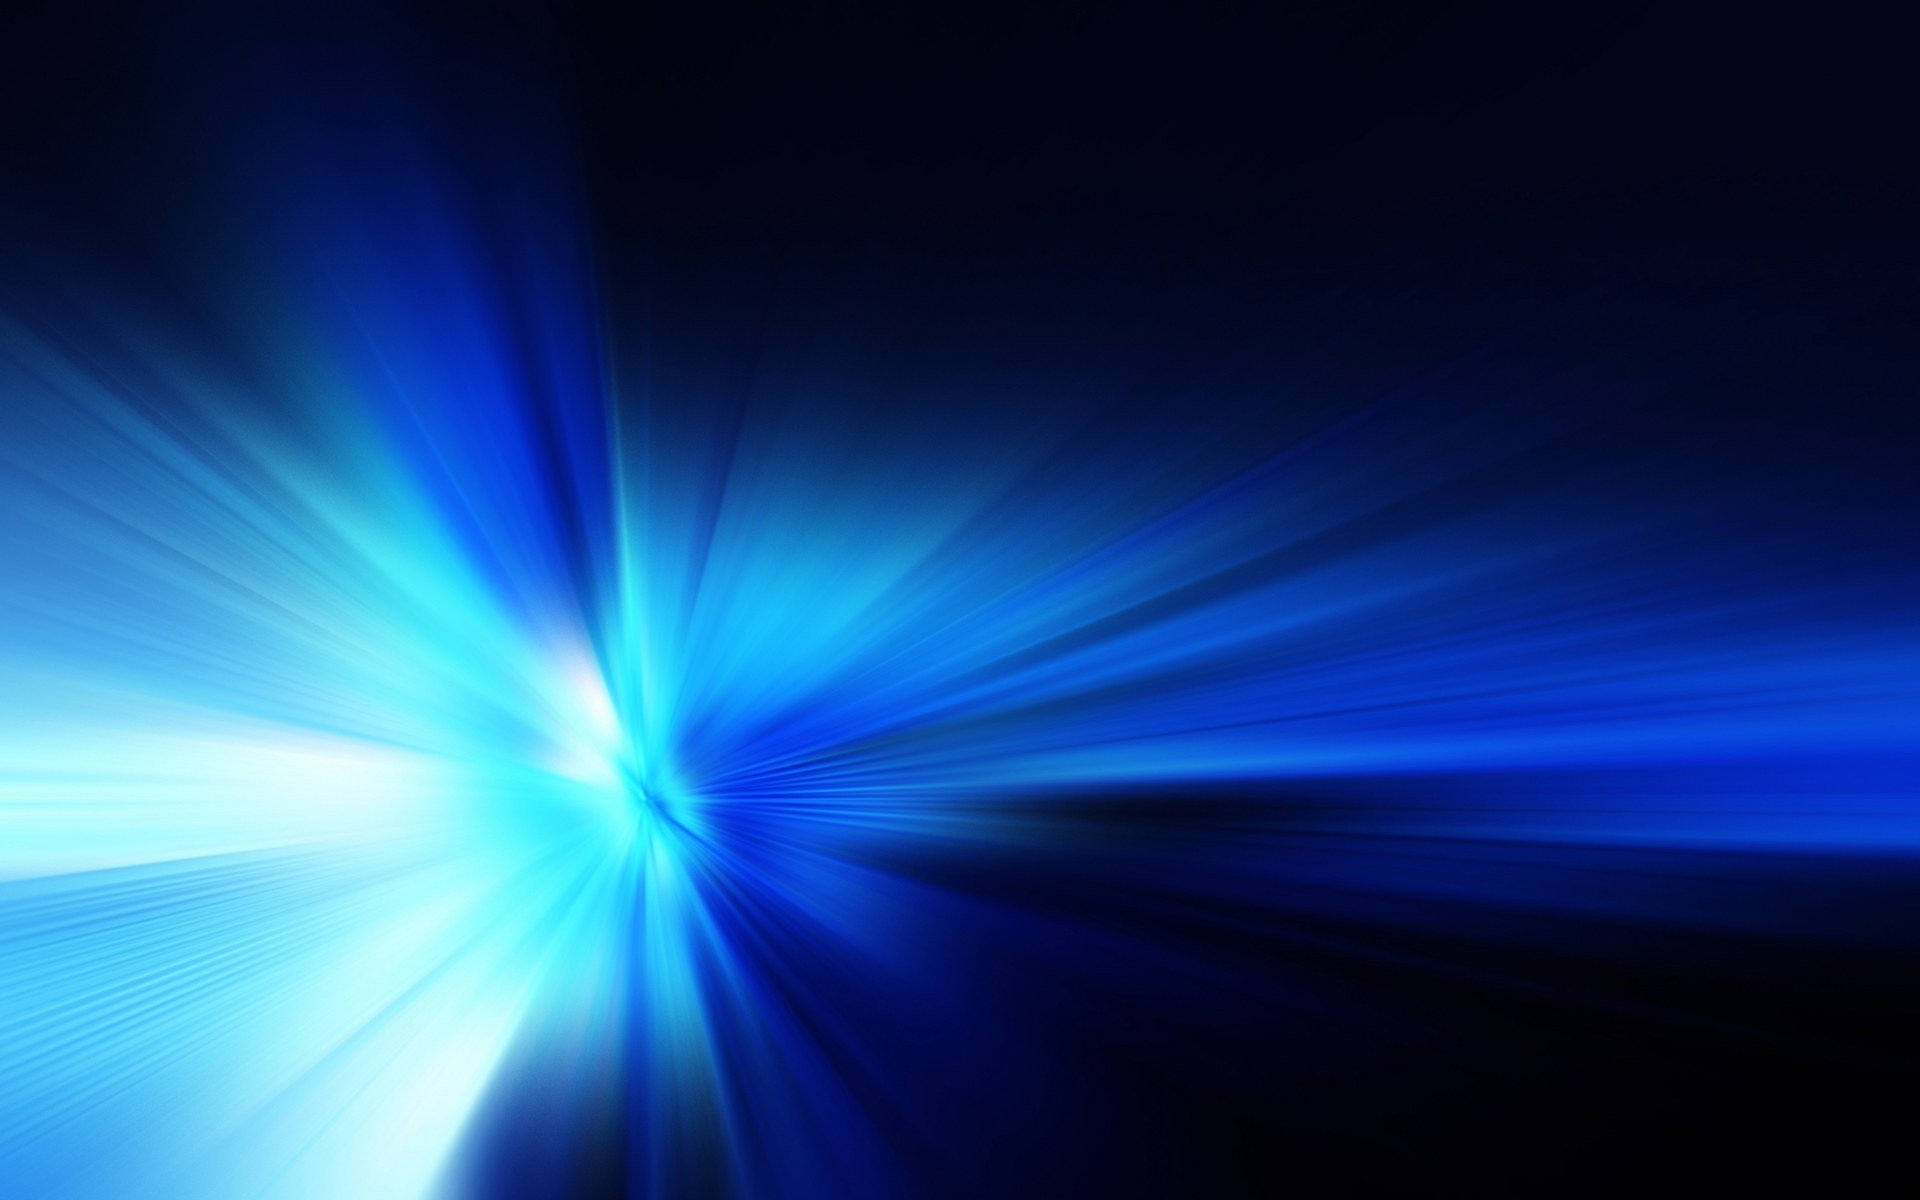 Abstract Backgrounds Blue 2946 Hd Wallpapers in Abstract   Imagesci